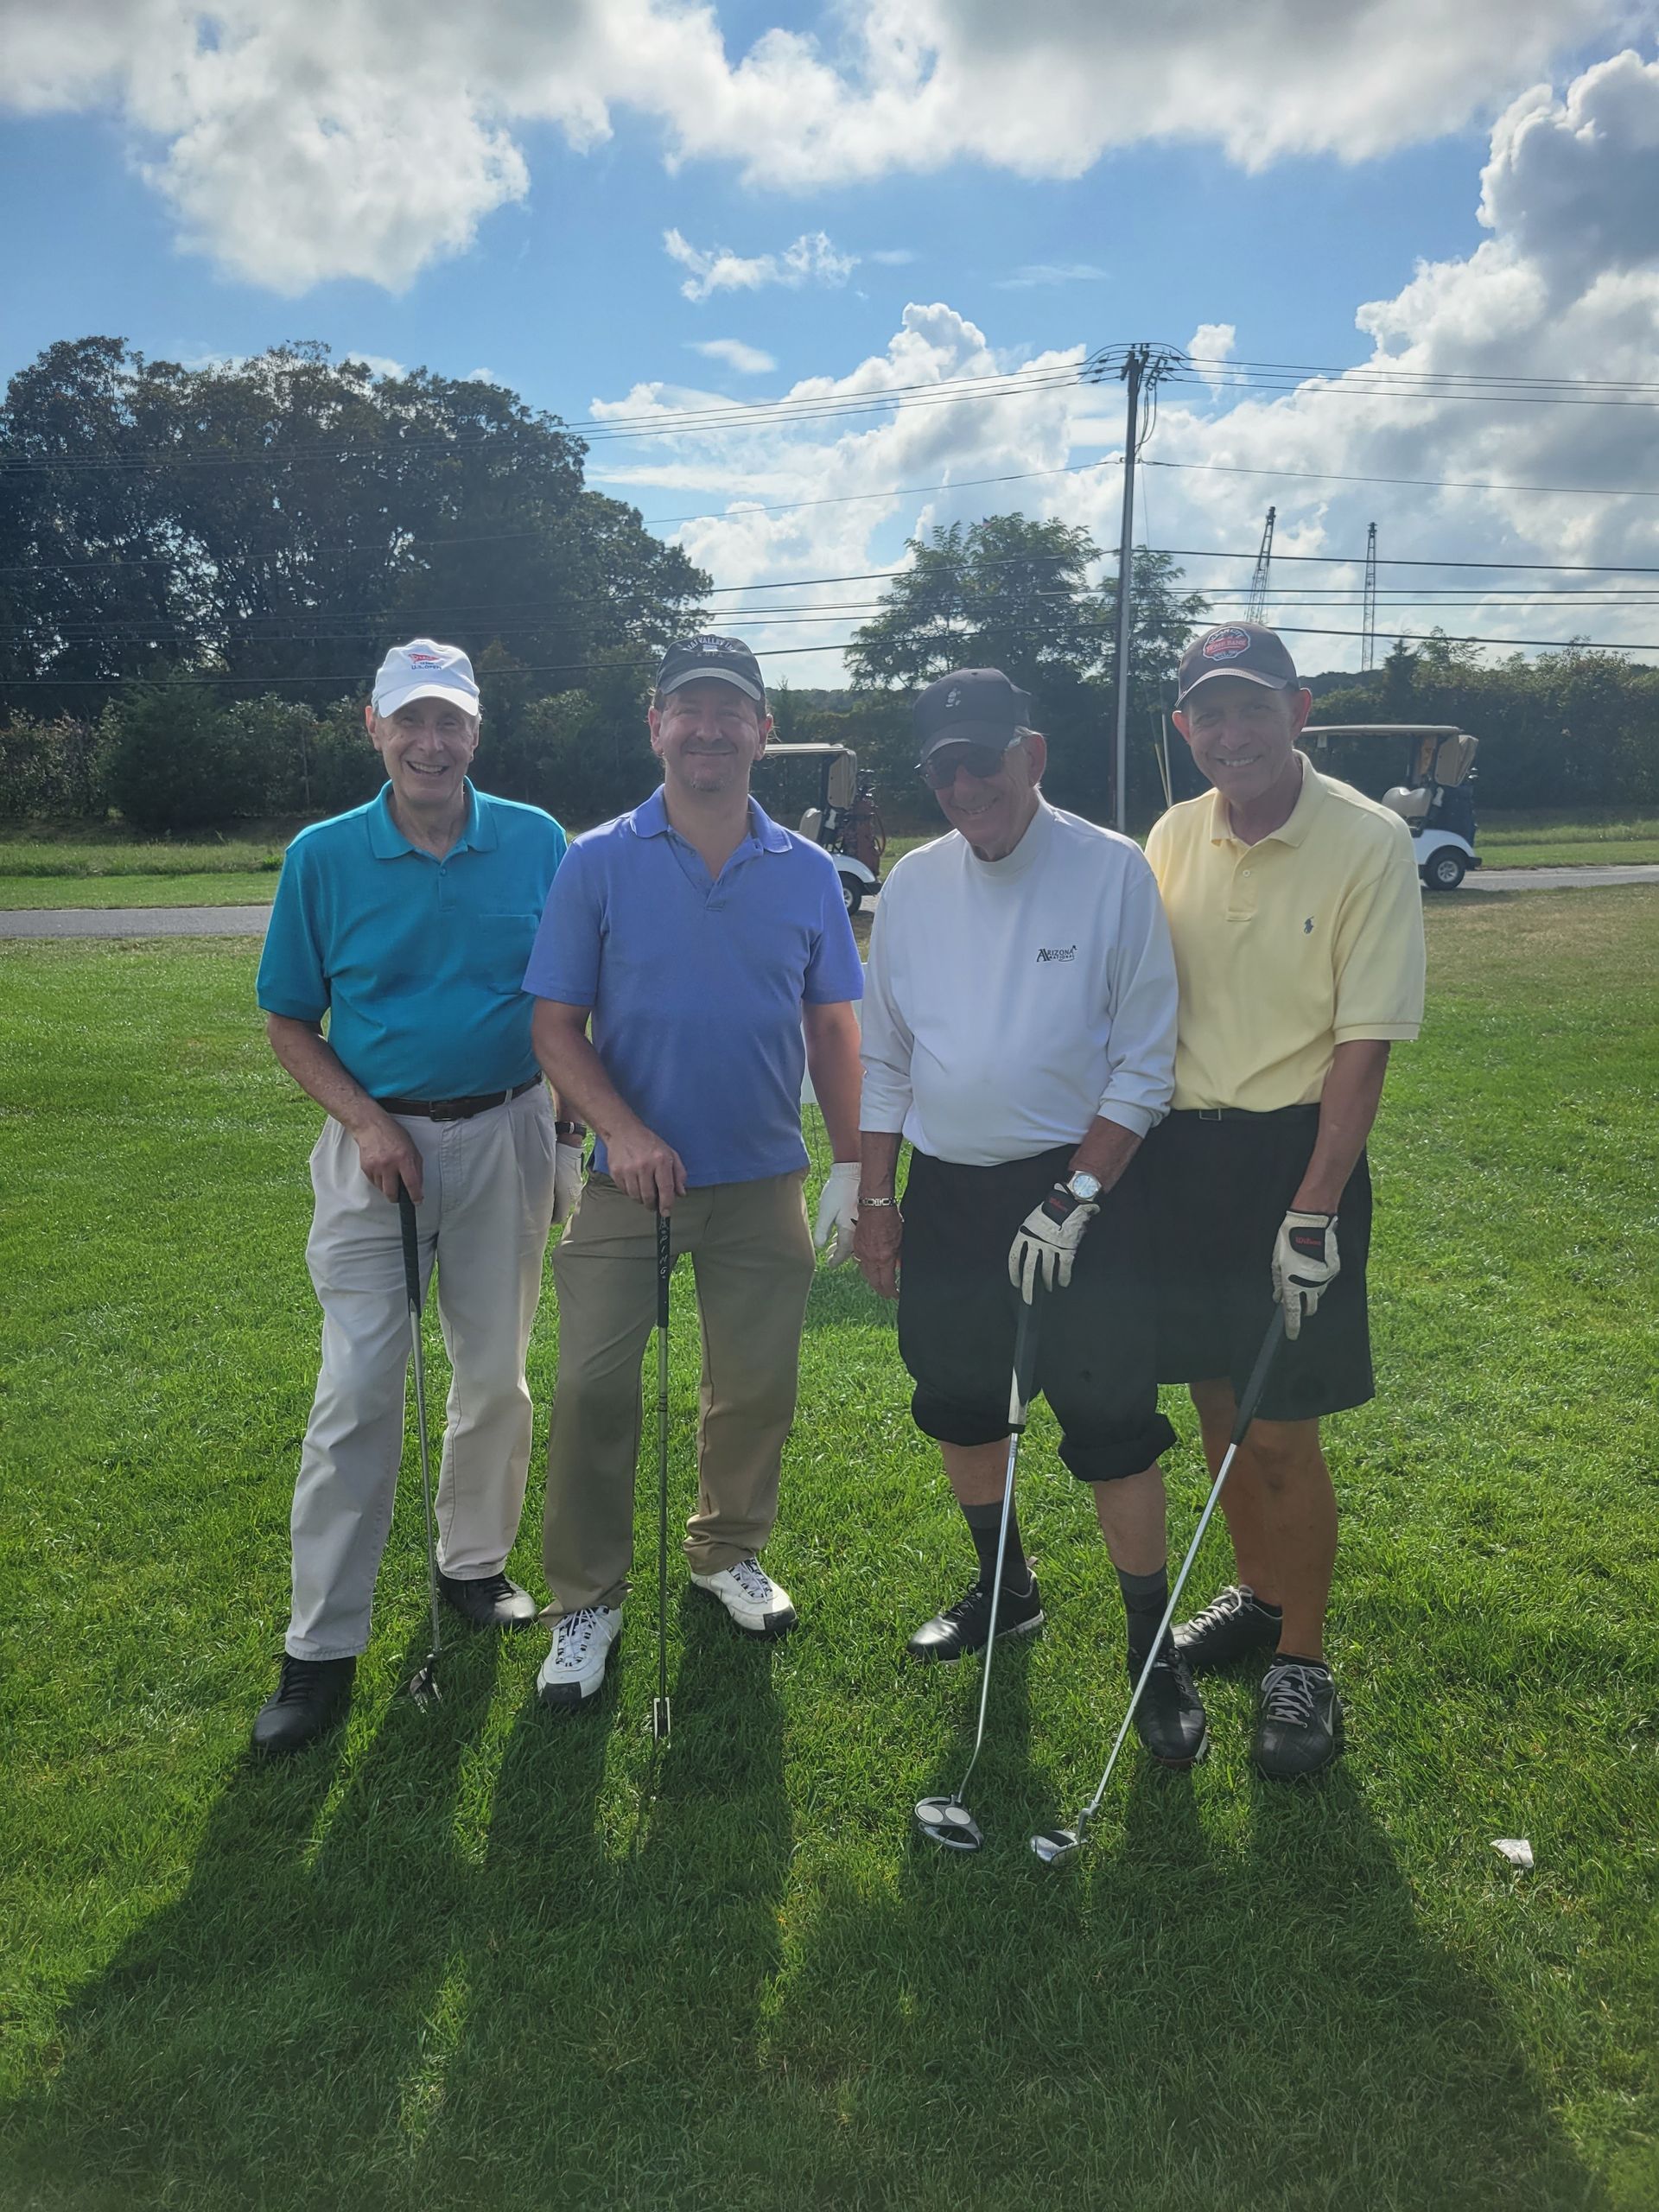 golfers playing in the remembering jamie golf tournament at mcculloughs golf course in egg harbor township new jersey